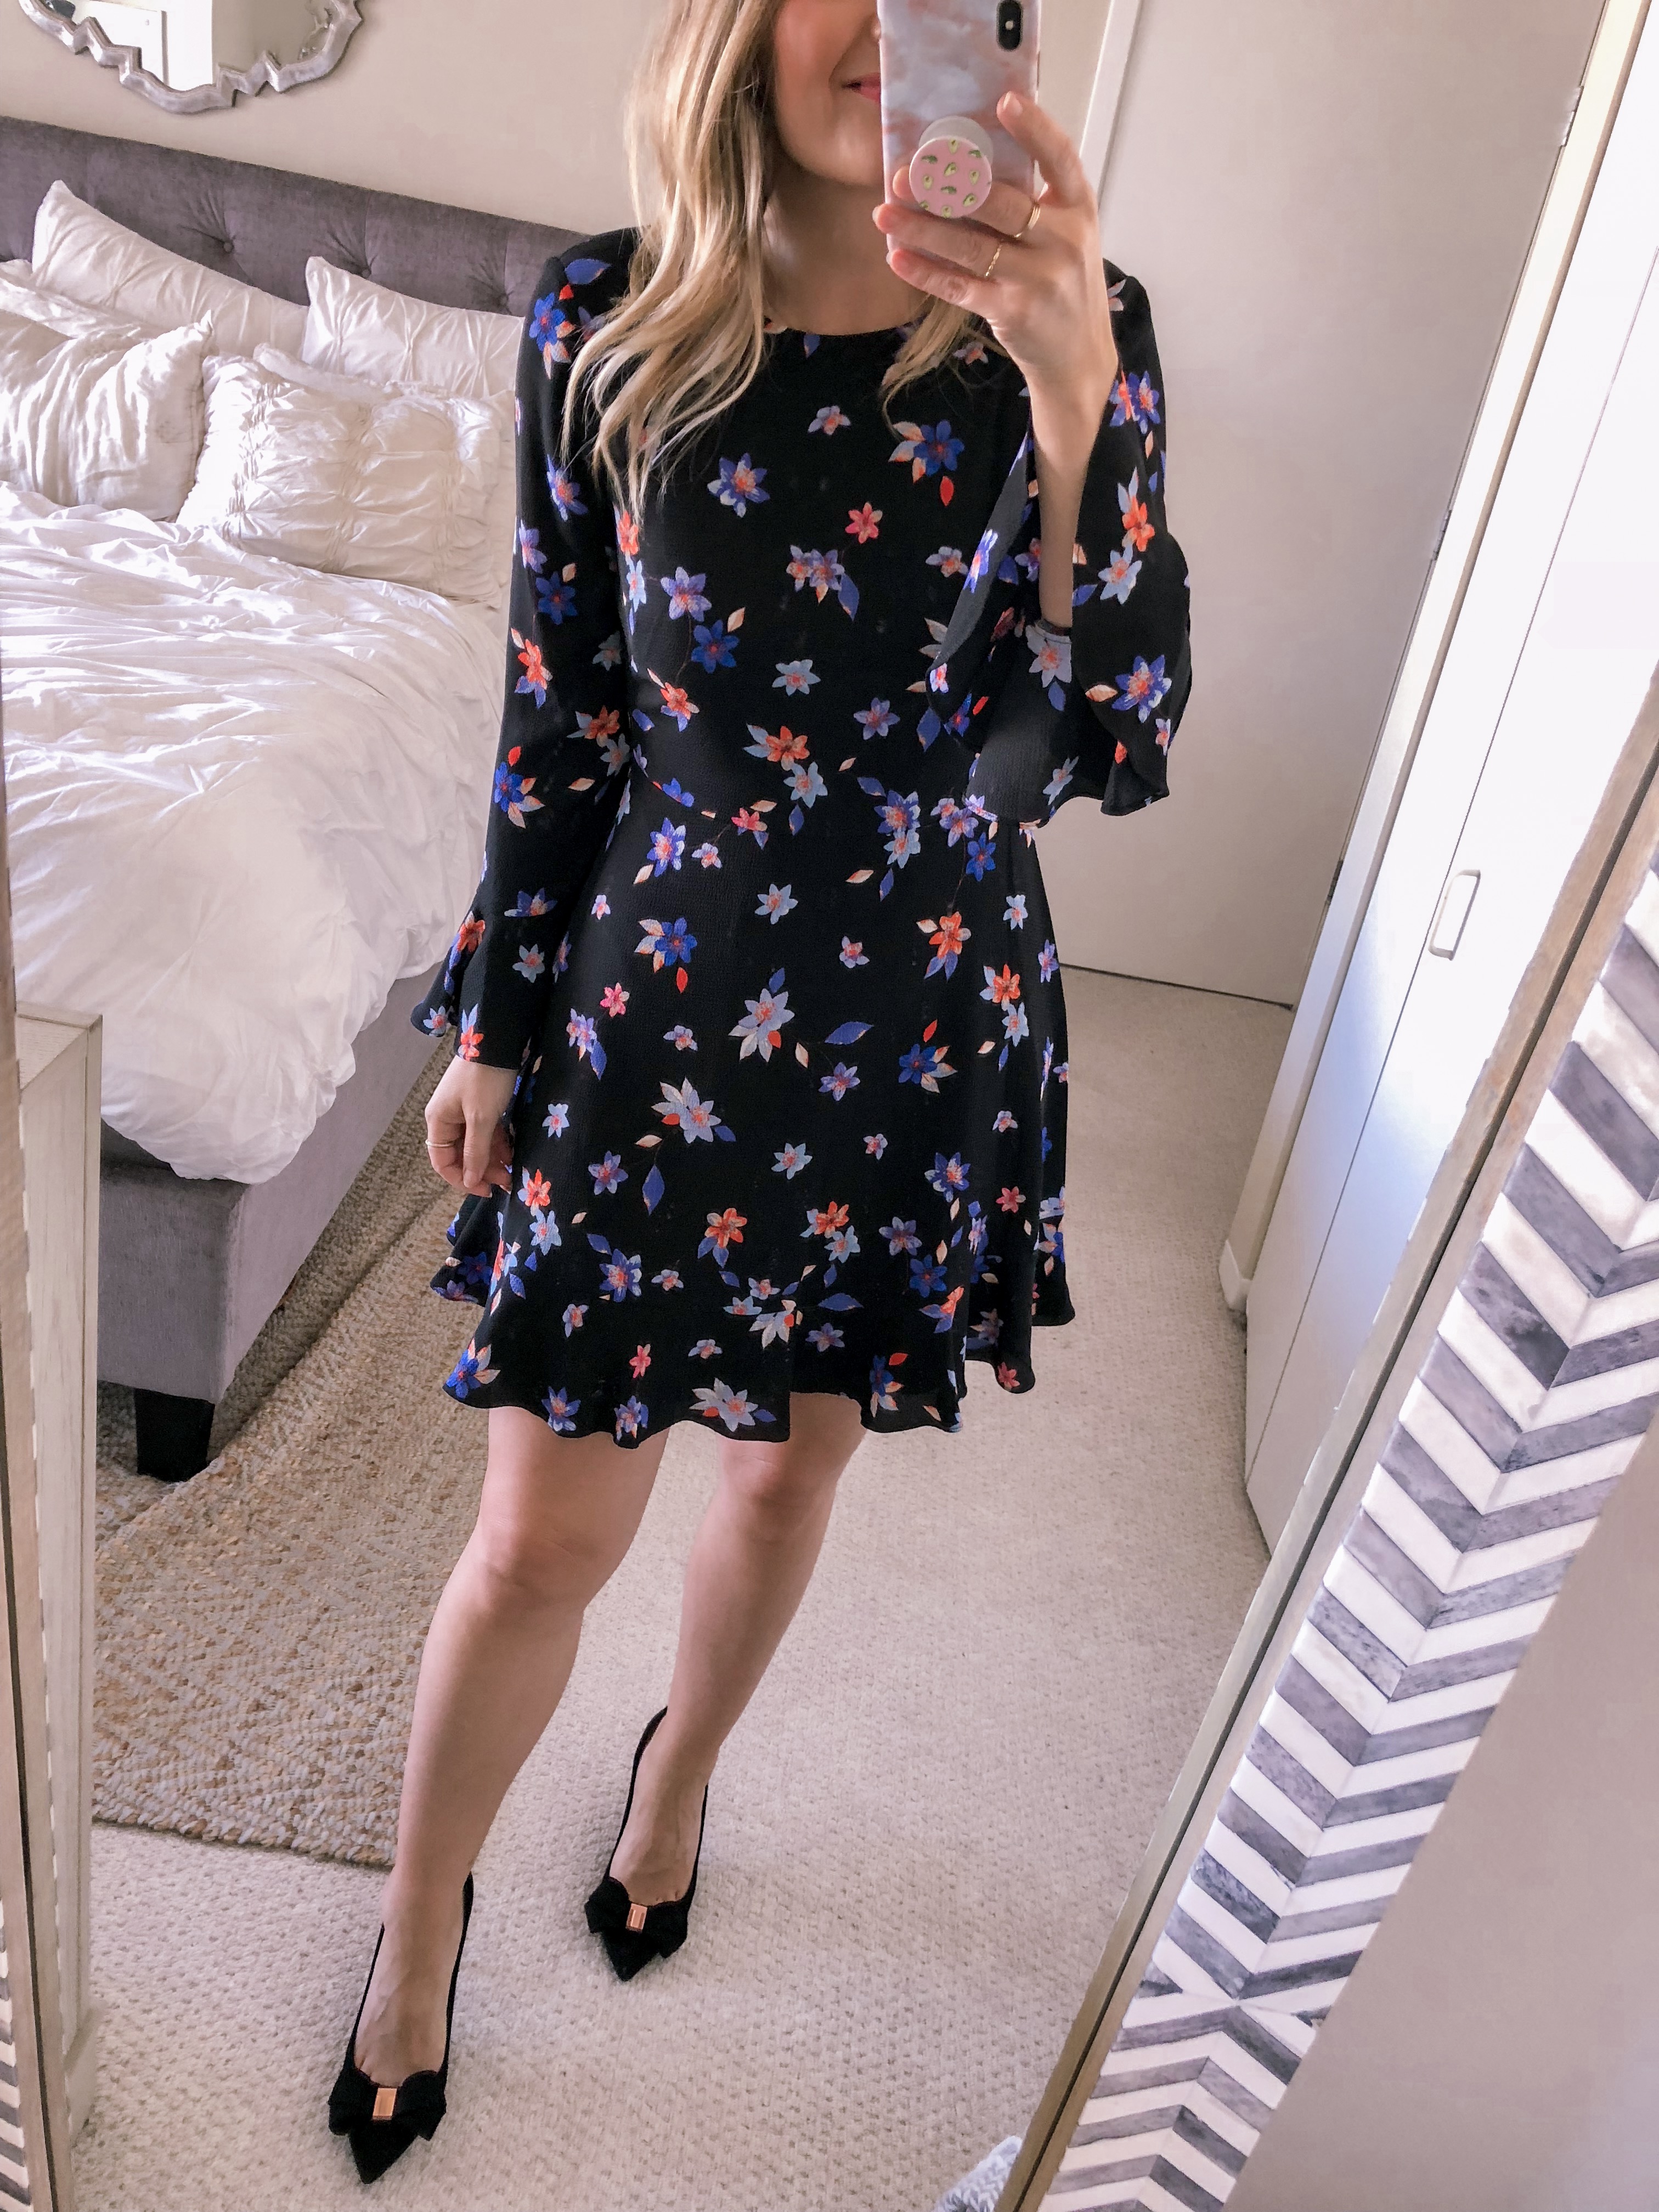 Popular Chicago fashion blogger Jenna Colgrove wears a fall floral dress with black Ted Baker pumps for a work office outfit idea.